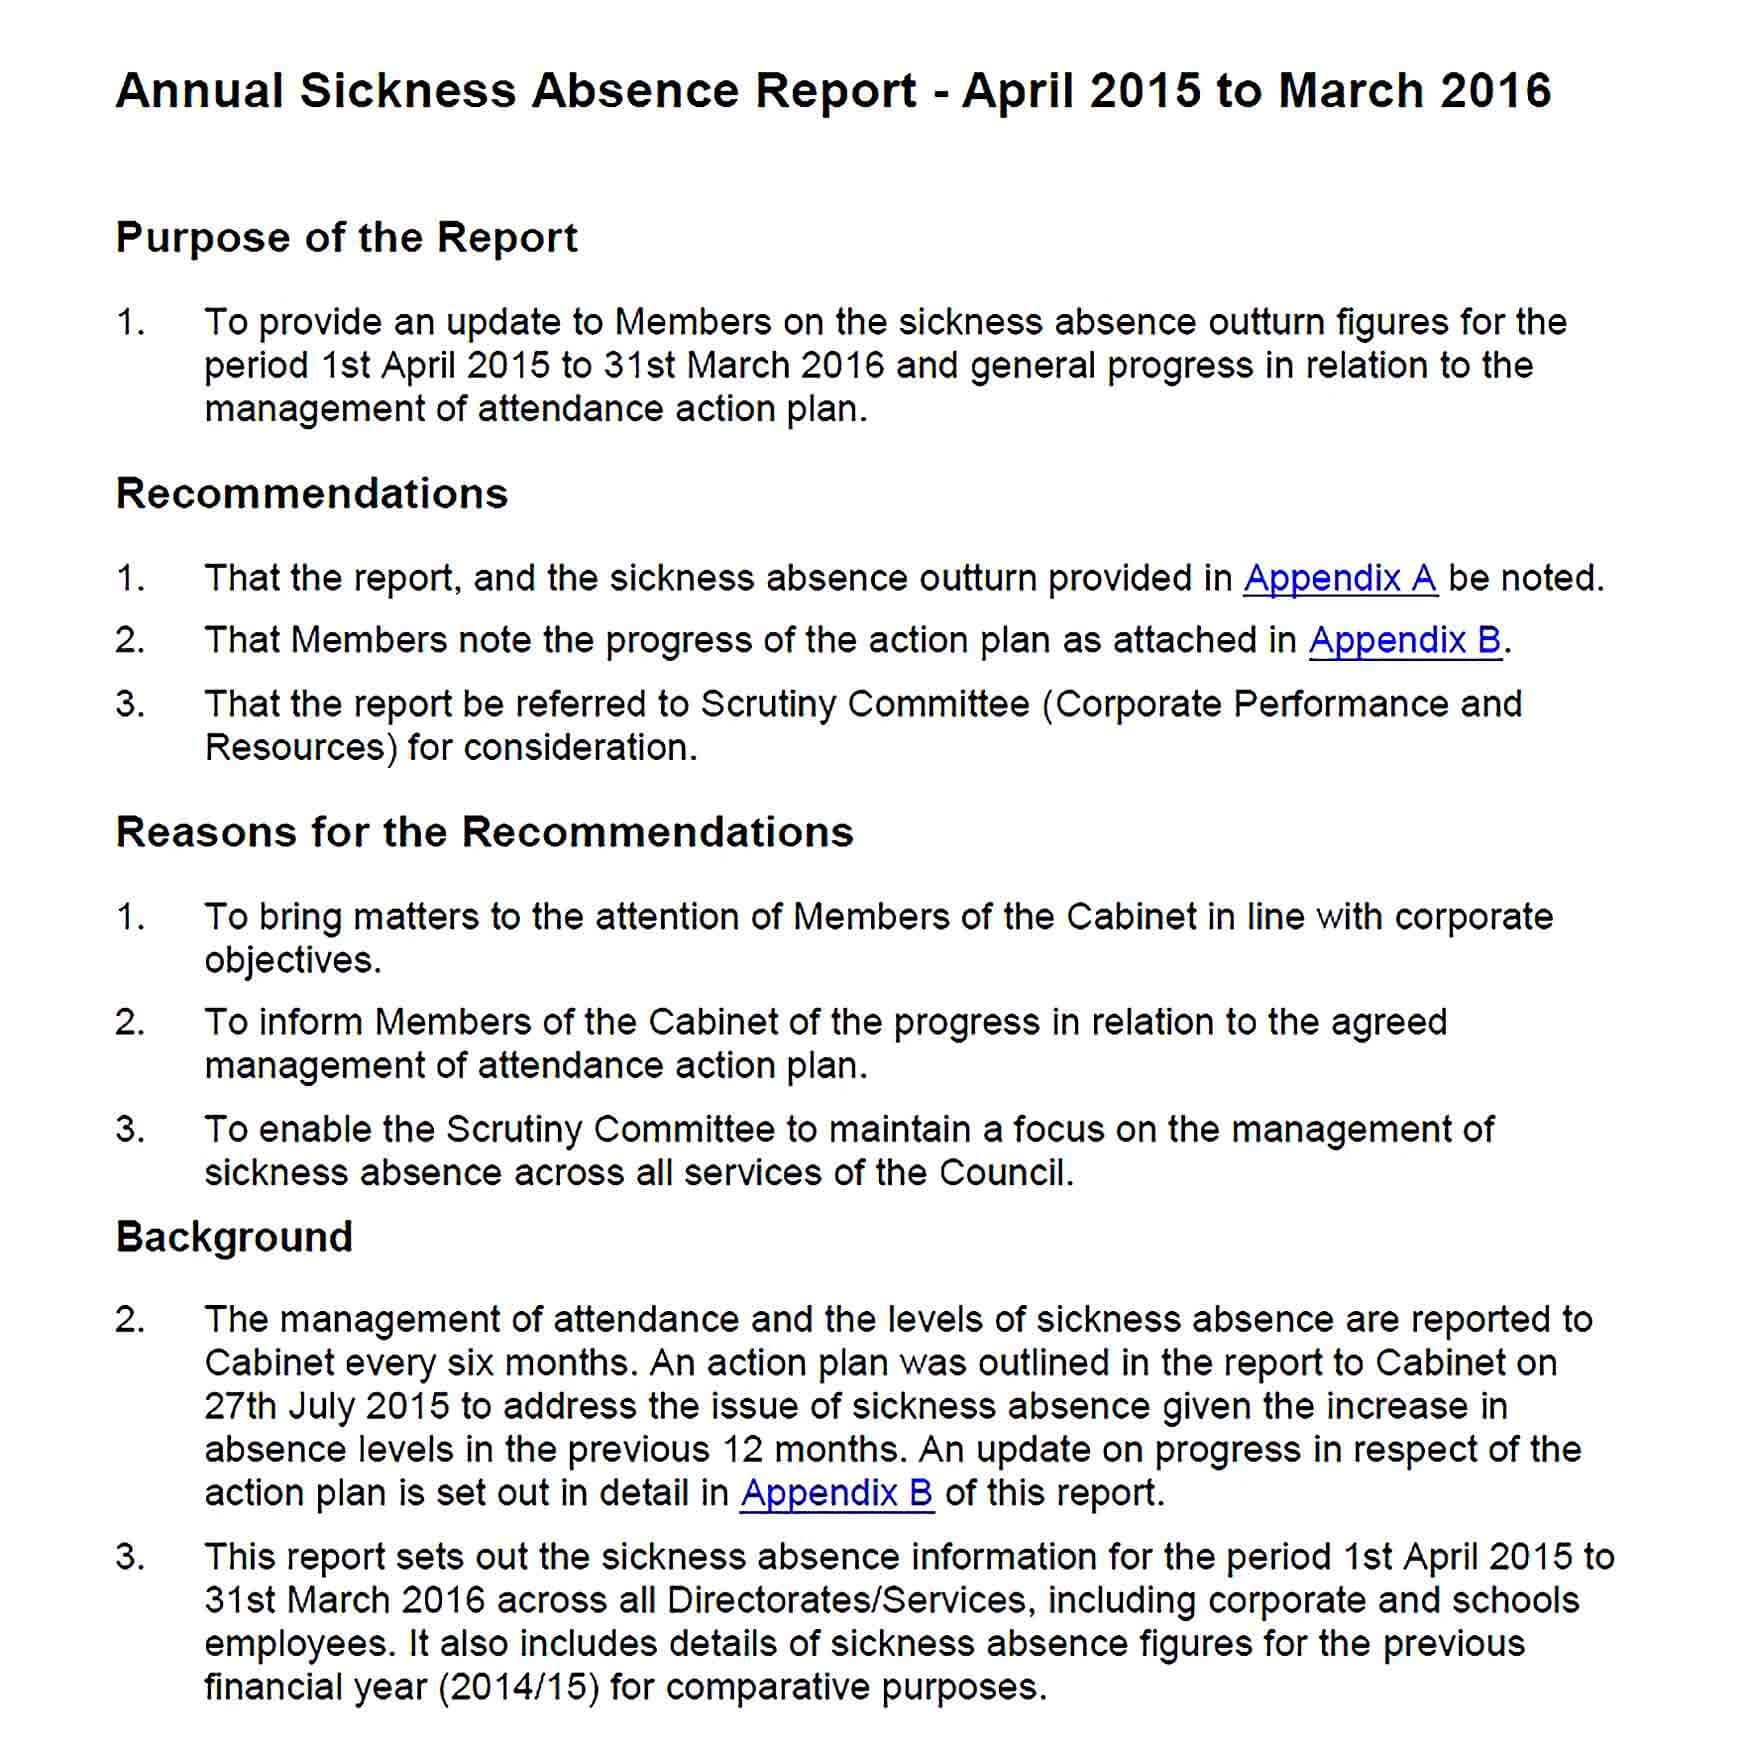 Sample Annual Sickness Absence Report